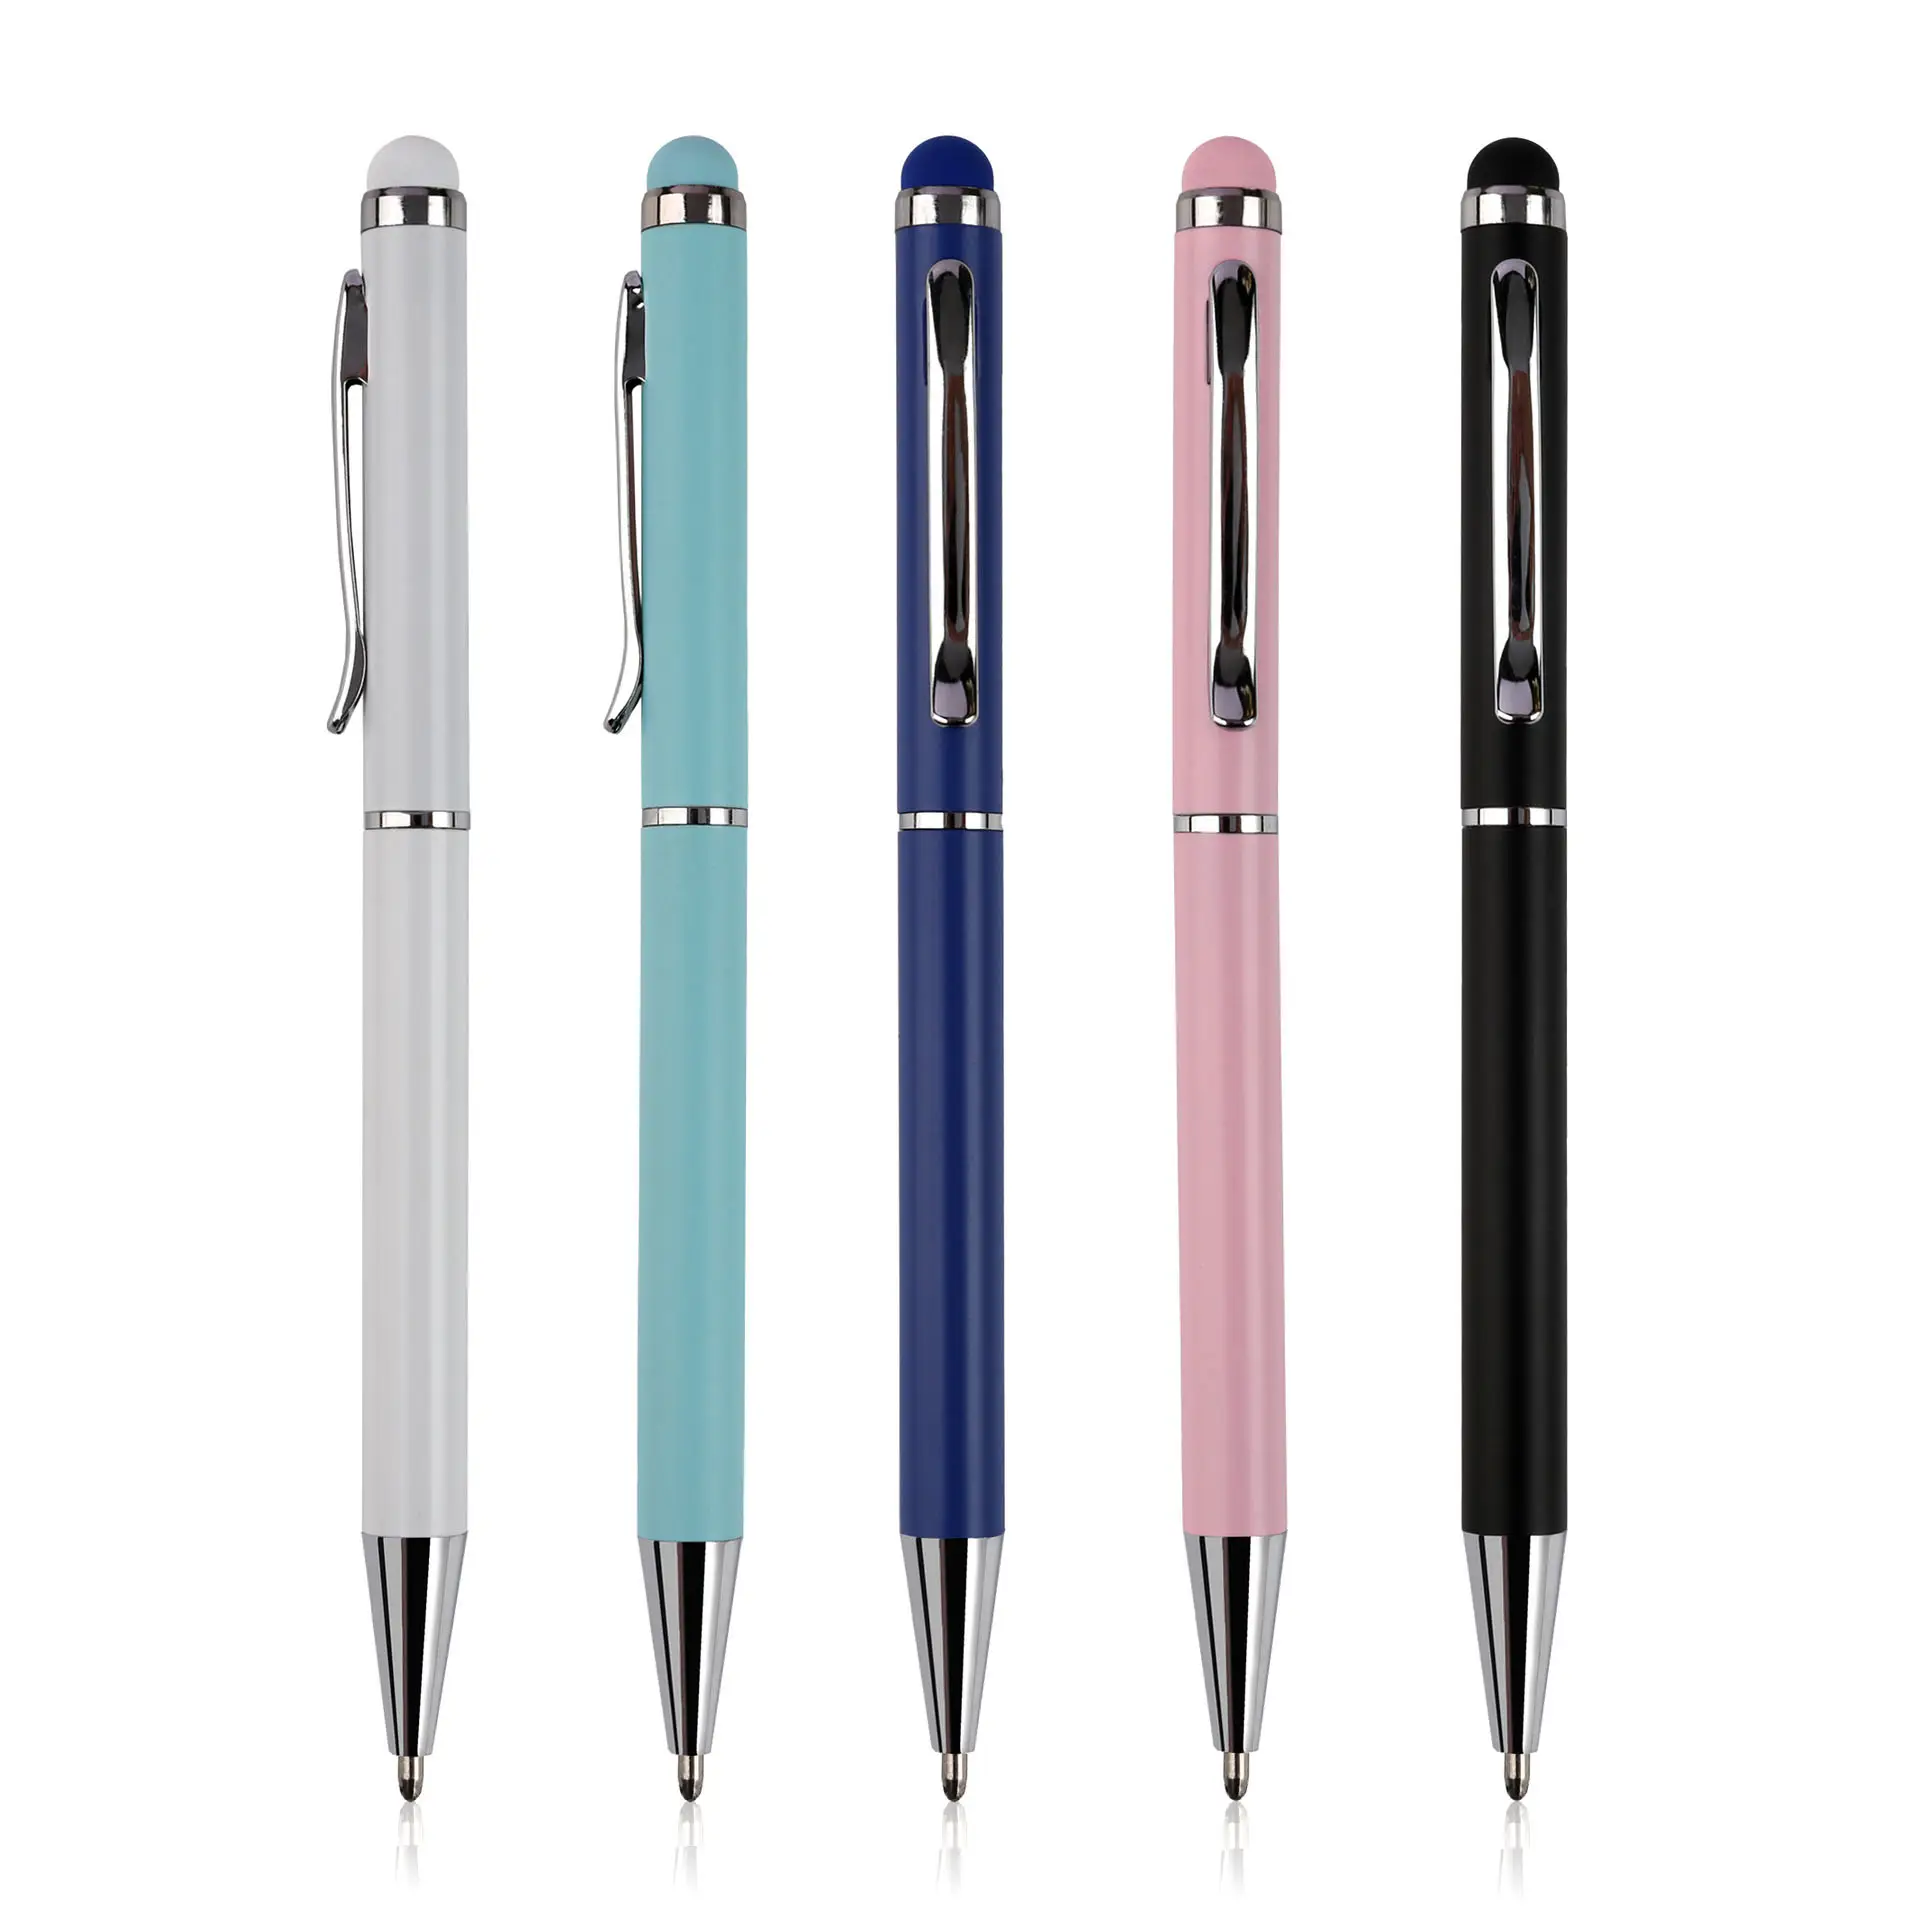 Eacajess samsung tablet for android microsoft surface pro apple metal stylus rollerball pen